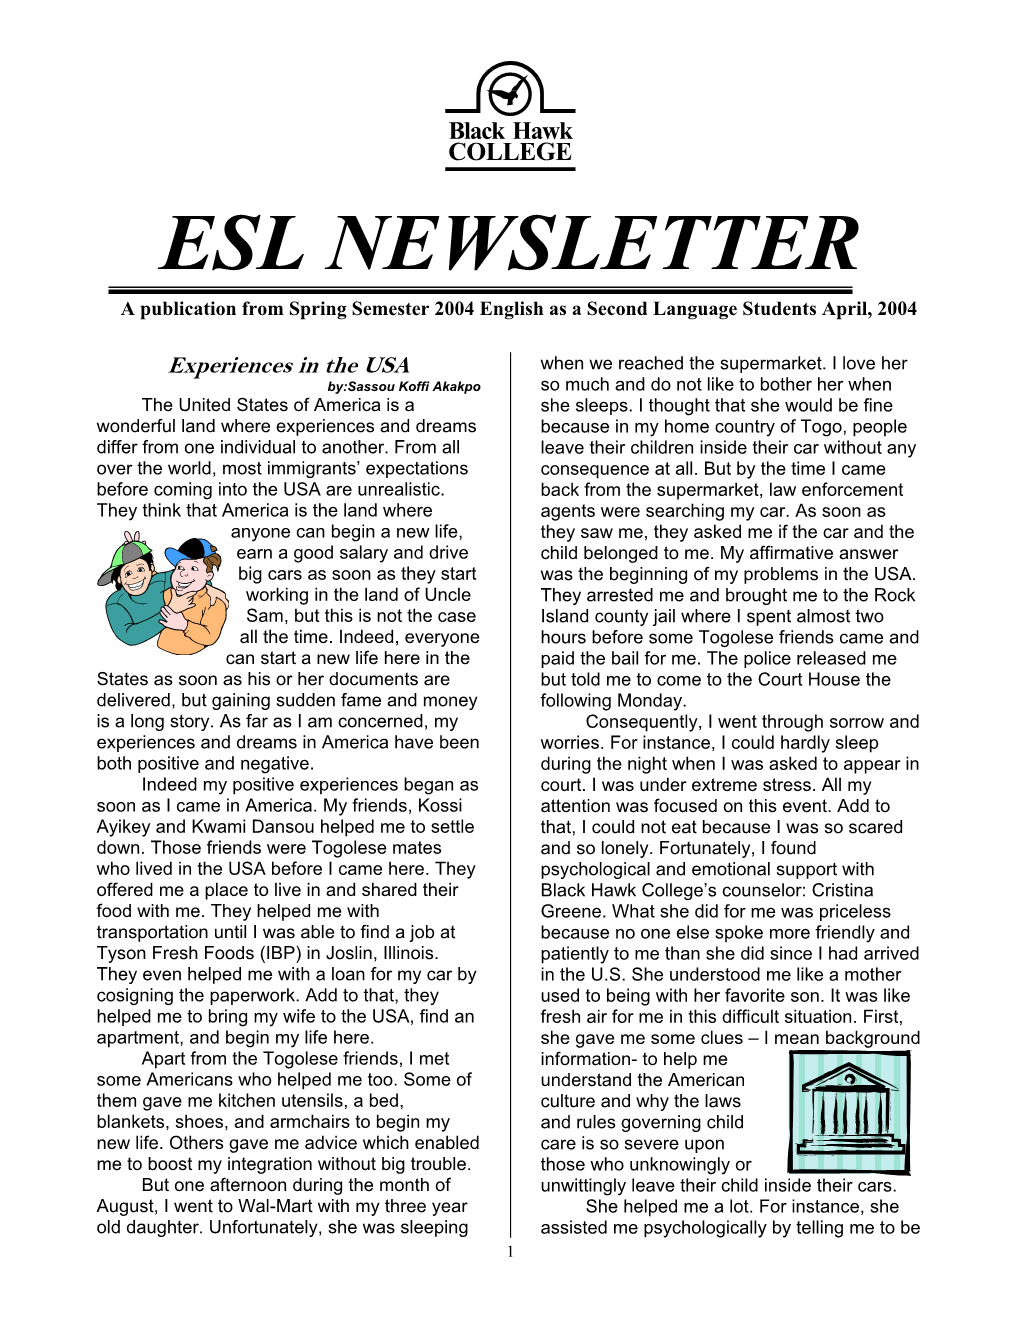 ESL NEWSLETTER a Publication from Spring Semester 2004 English As a Second Language Students April, 2004